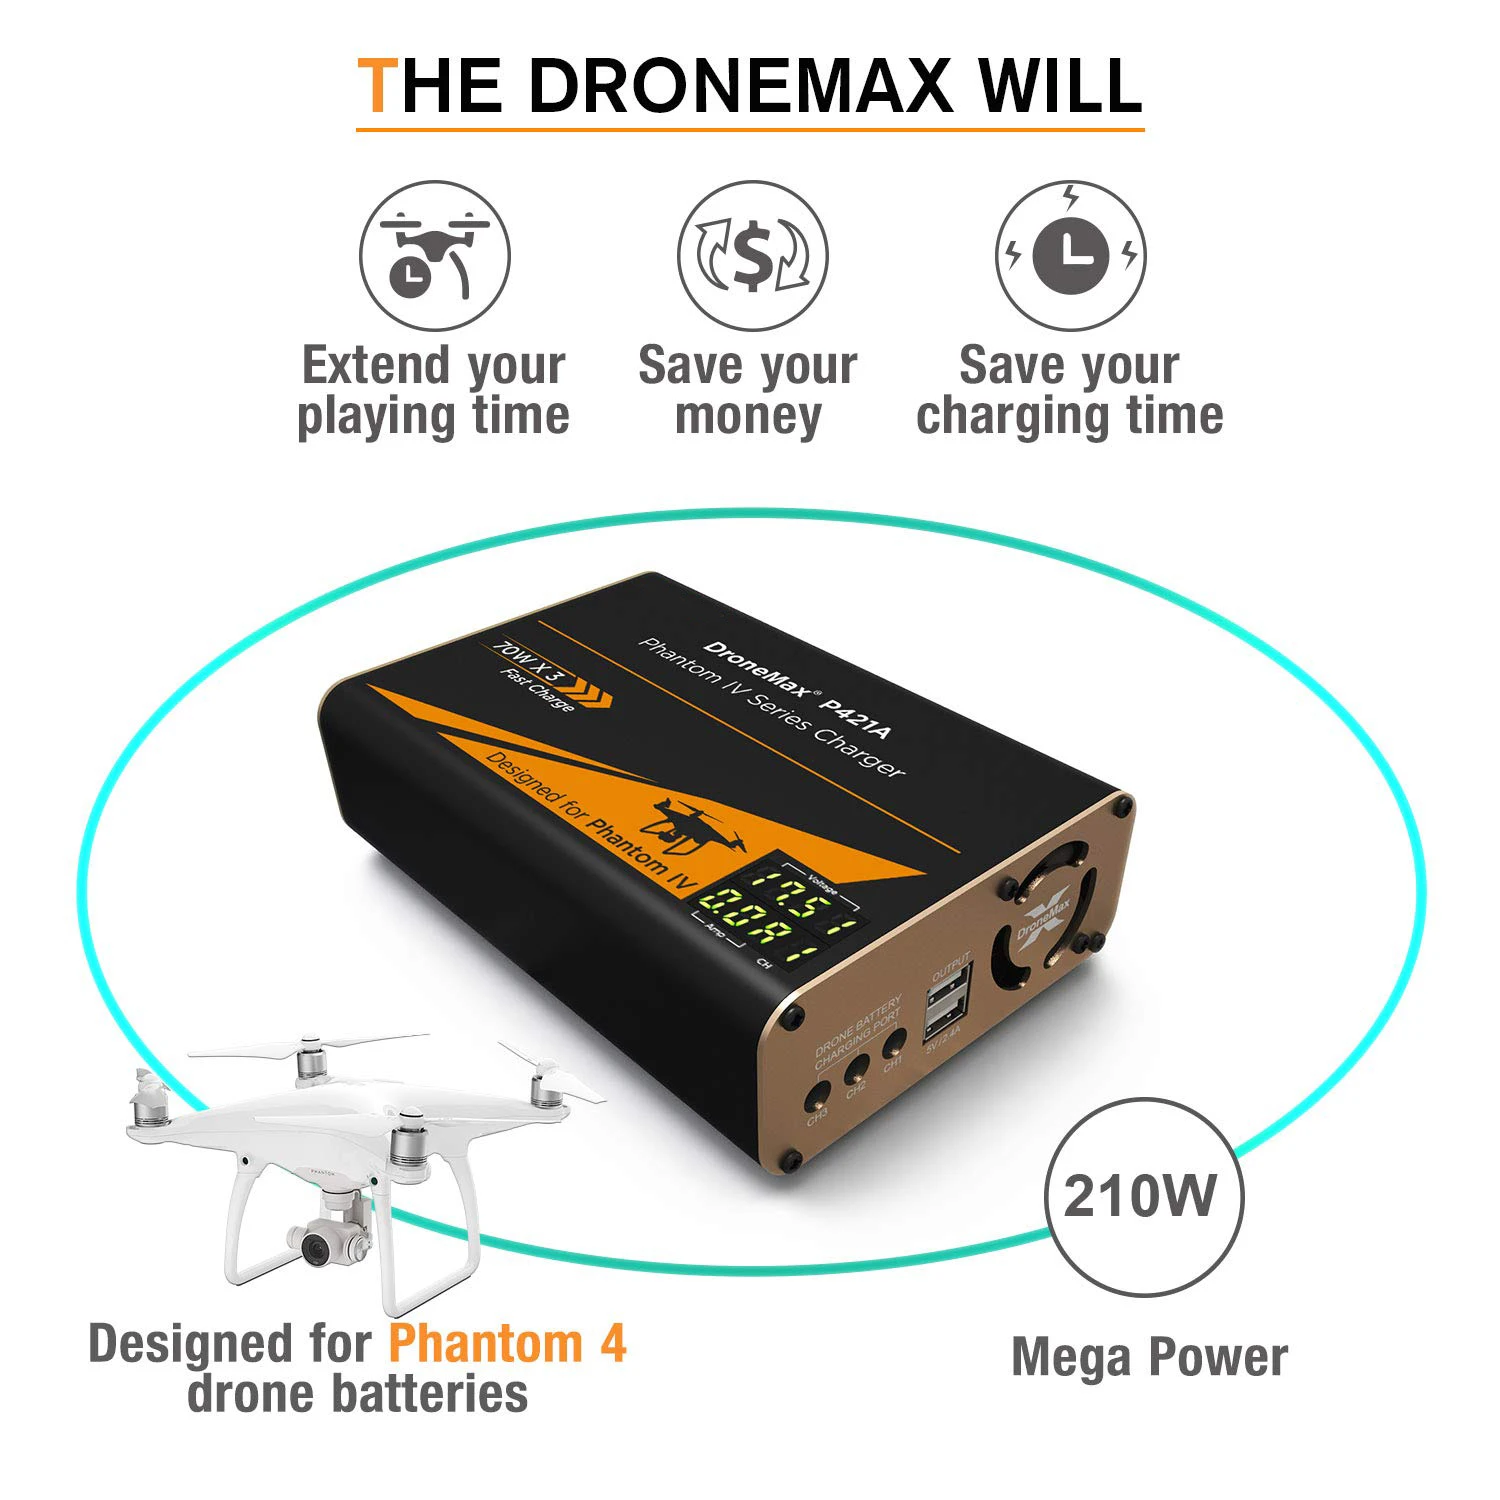 Energen DroneMax P421A AC Power Drone Battery Charger for DJI Phantom 4